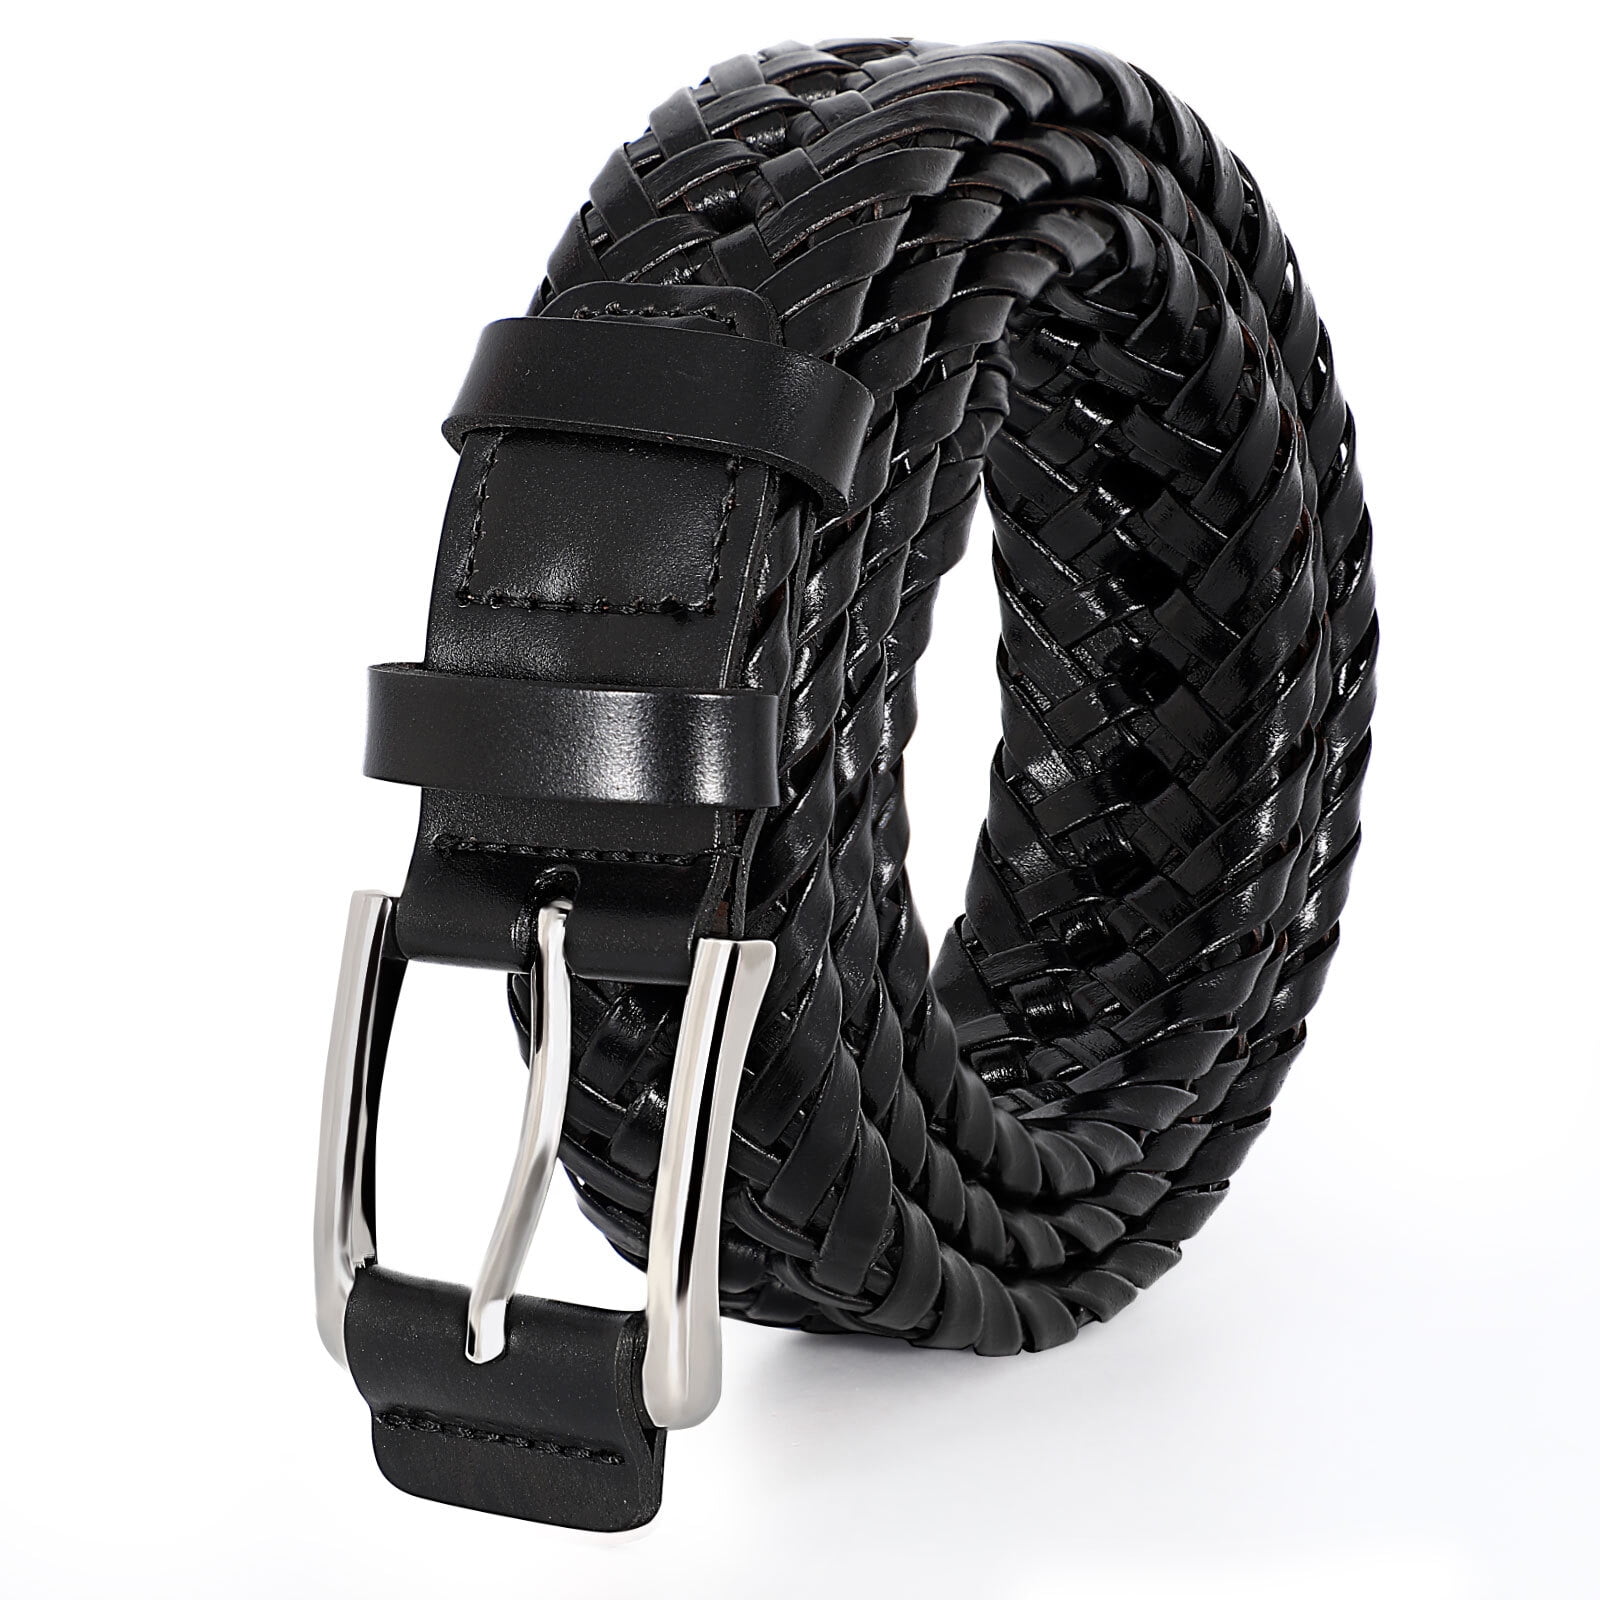 WHIPPY Men's Braided Leather Belt, Woven Casual Belt for Jeans Pants ...